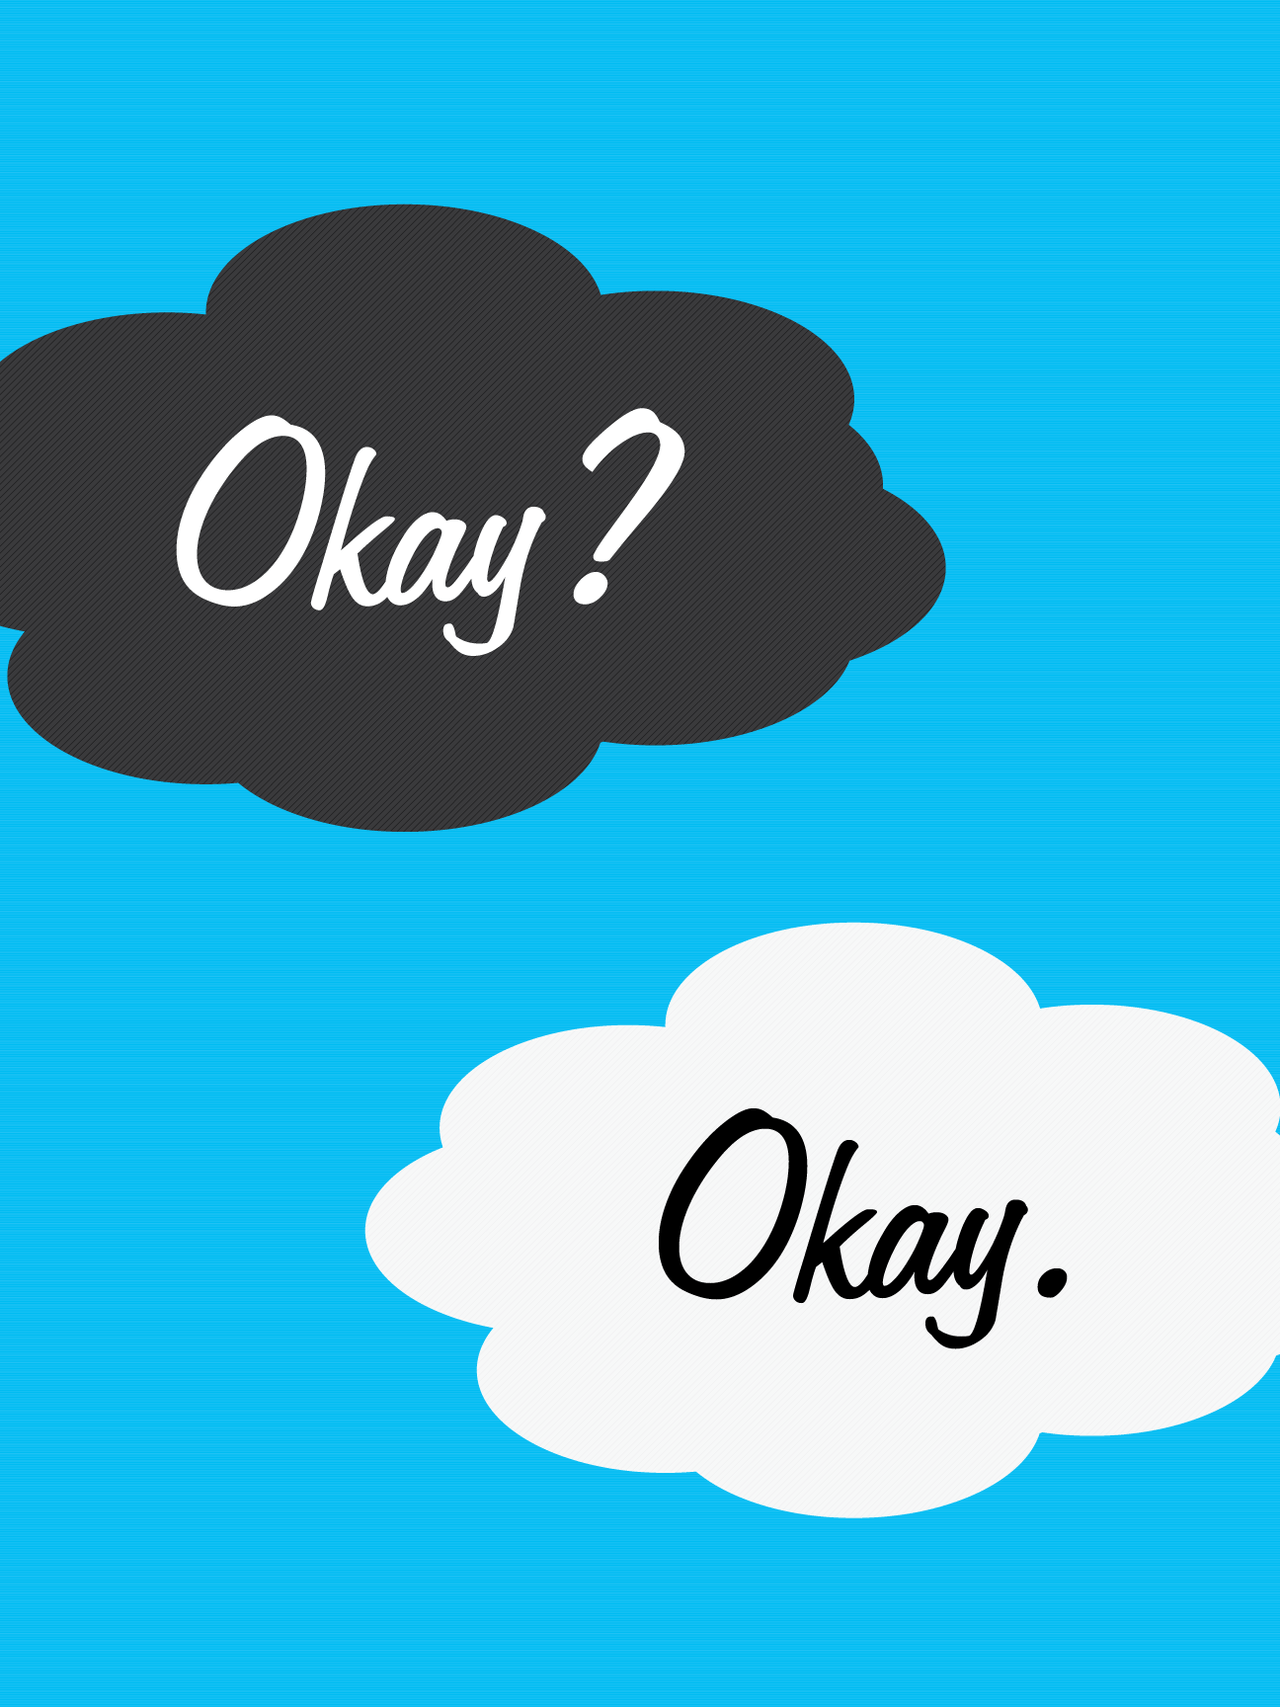 the fault in our stars wallpaper okay